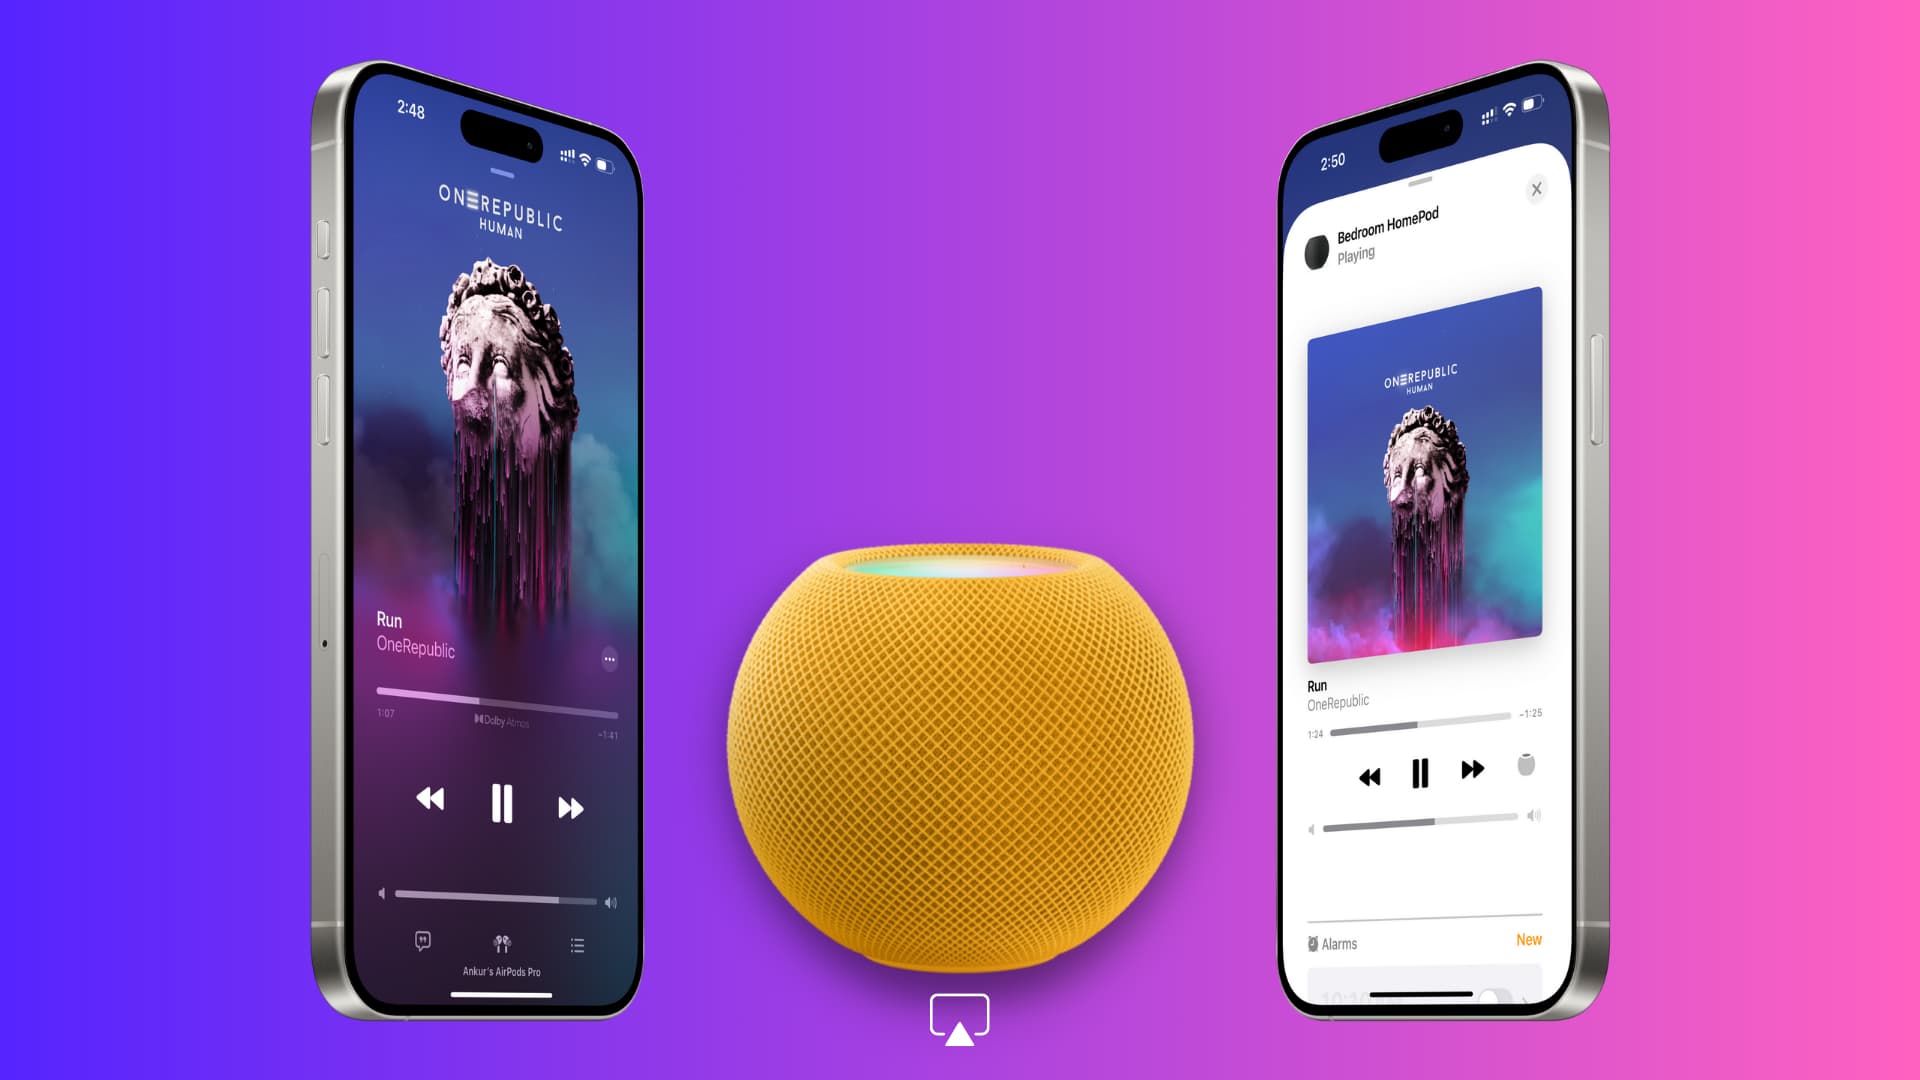 How to stop seeing full-screen HomePod playback transfer screens on iPhone